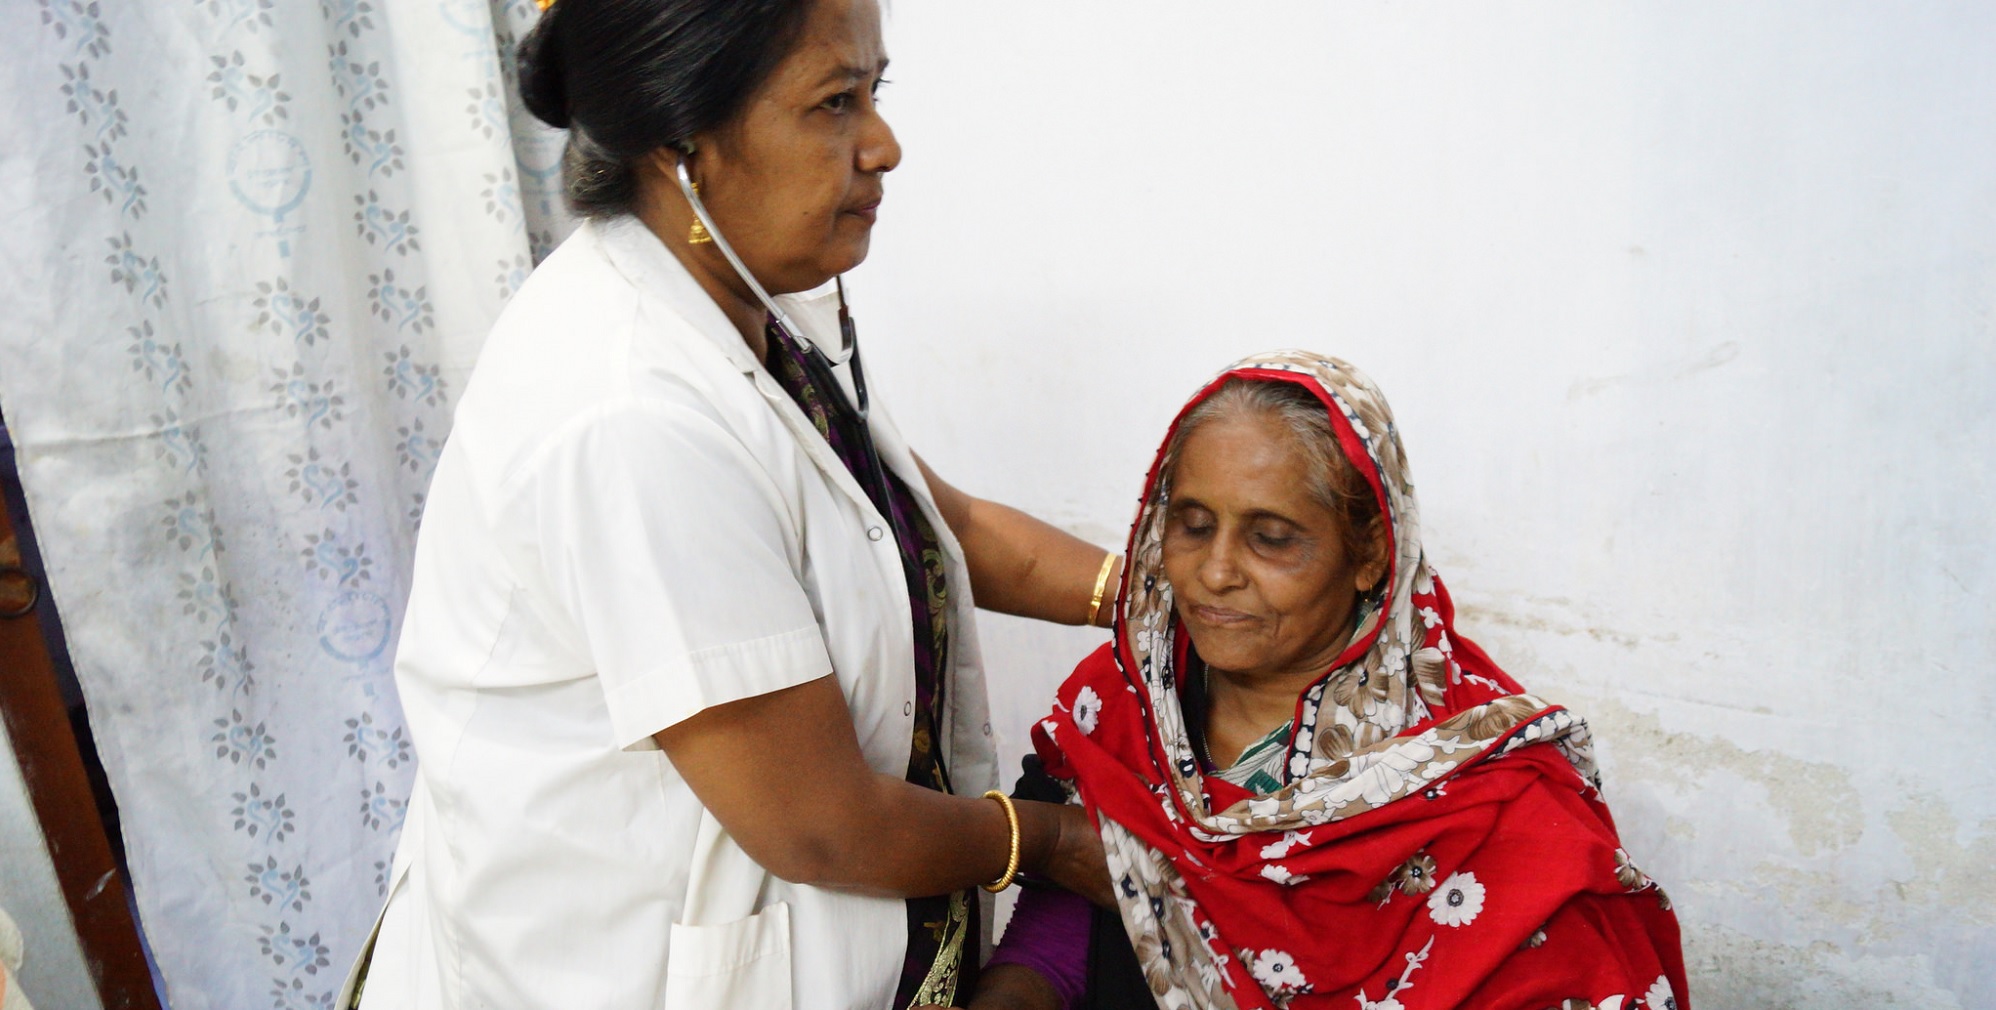  _603_https://www.helpage.org/silo/images/access-to-health-in-bangladesh_1996x1010.jpg